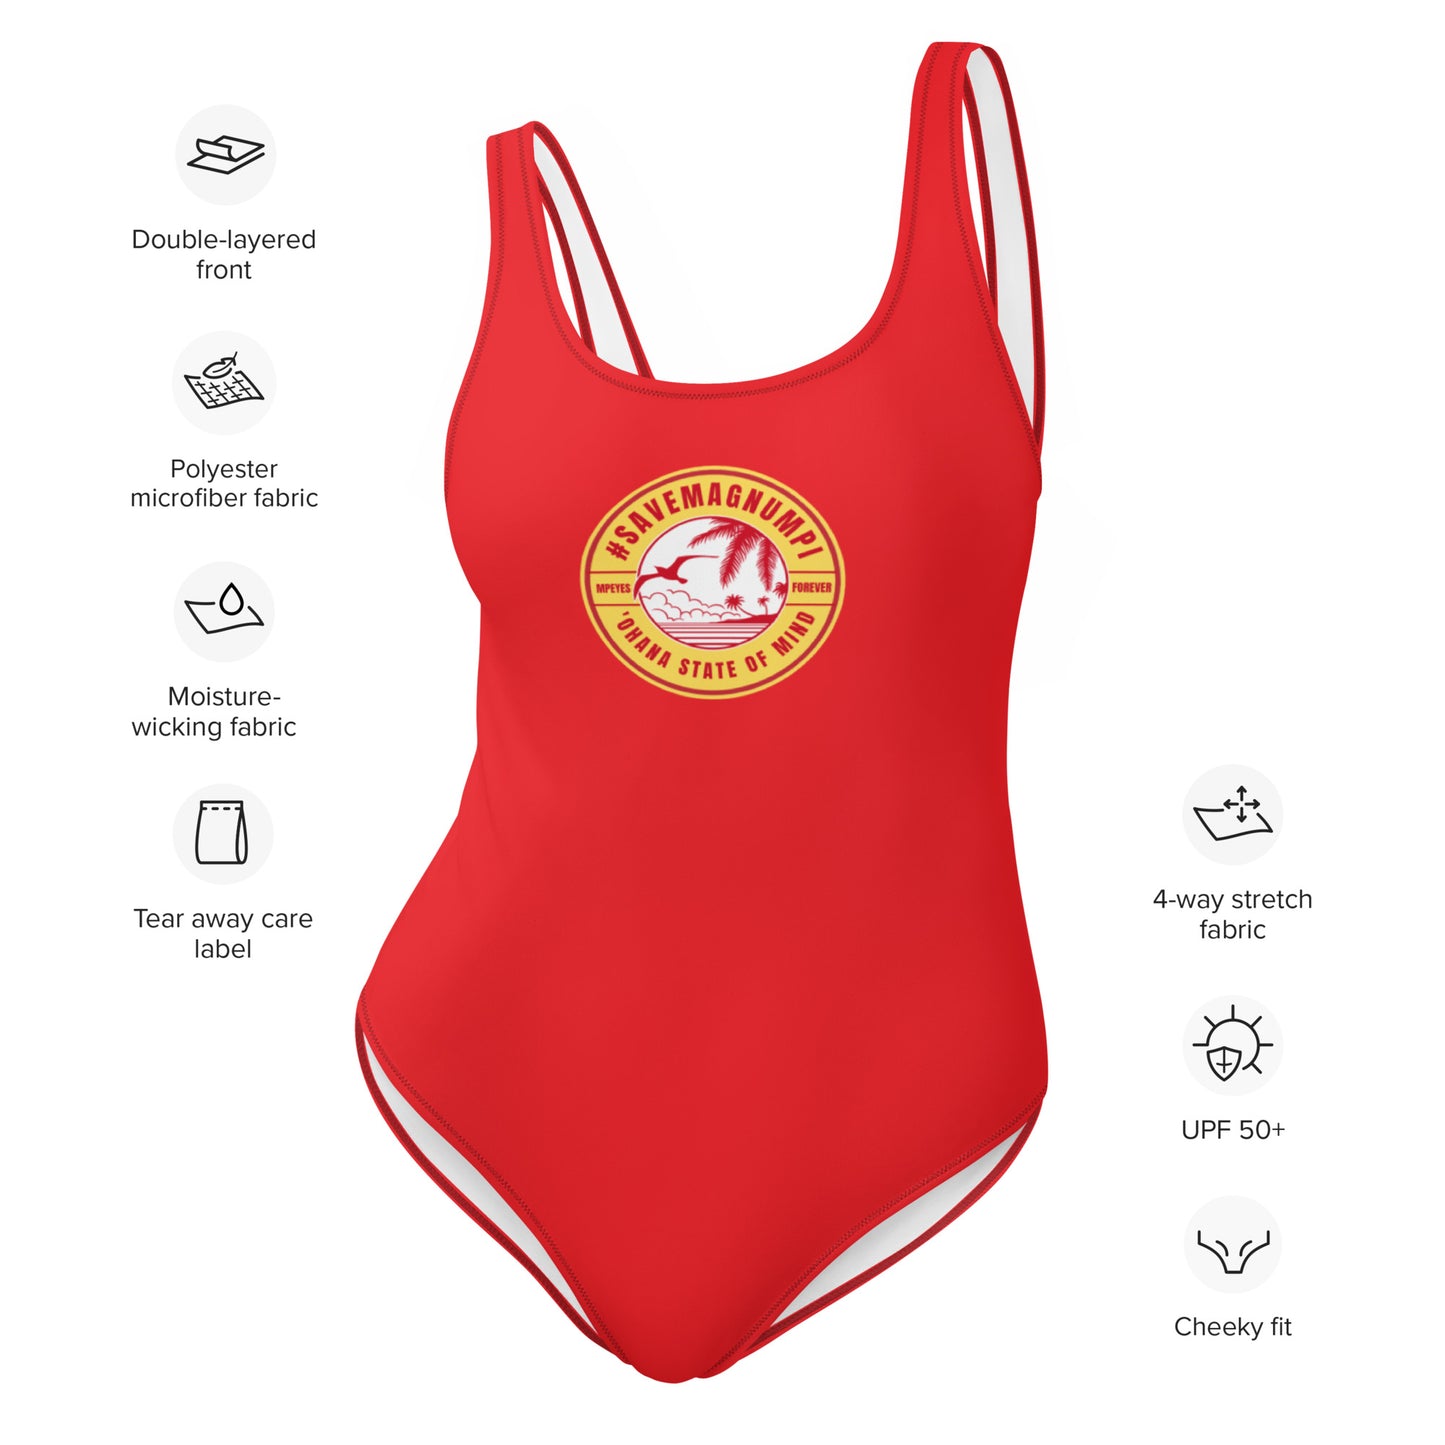 #SAVEMAGNUMPI One-Piece Swimsuit - Red